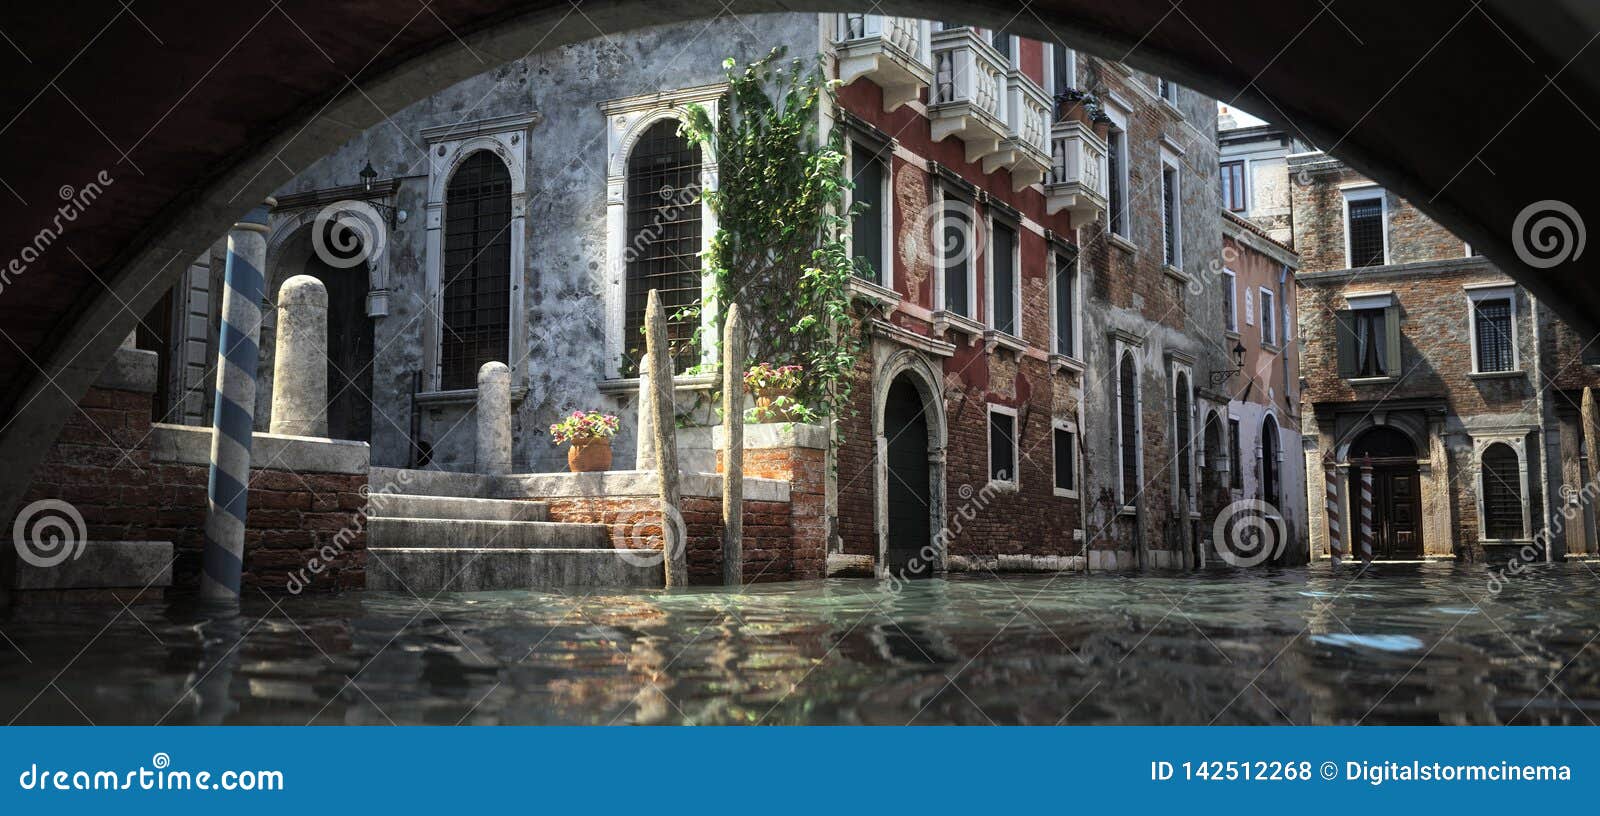 floating in the canal`s of the enchanting romantic architecture and waterways of italy.